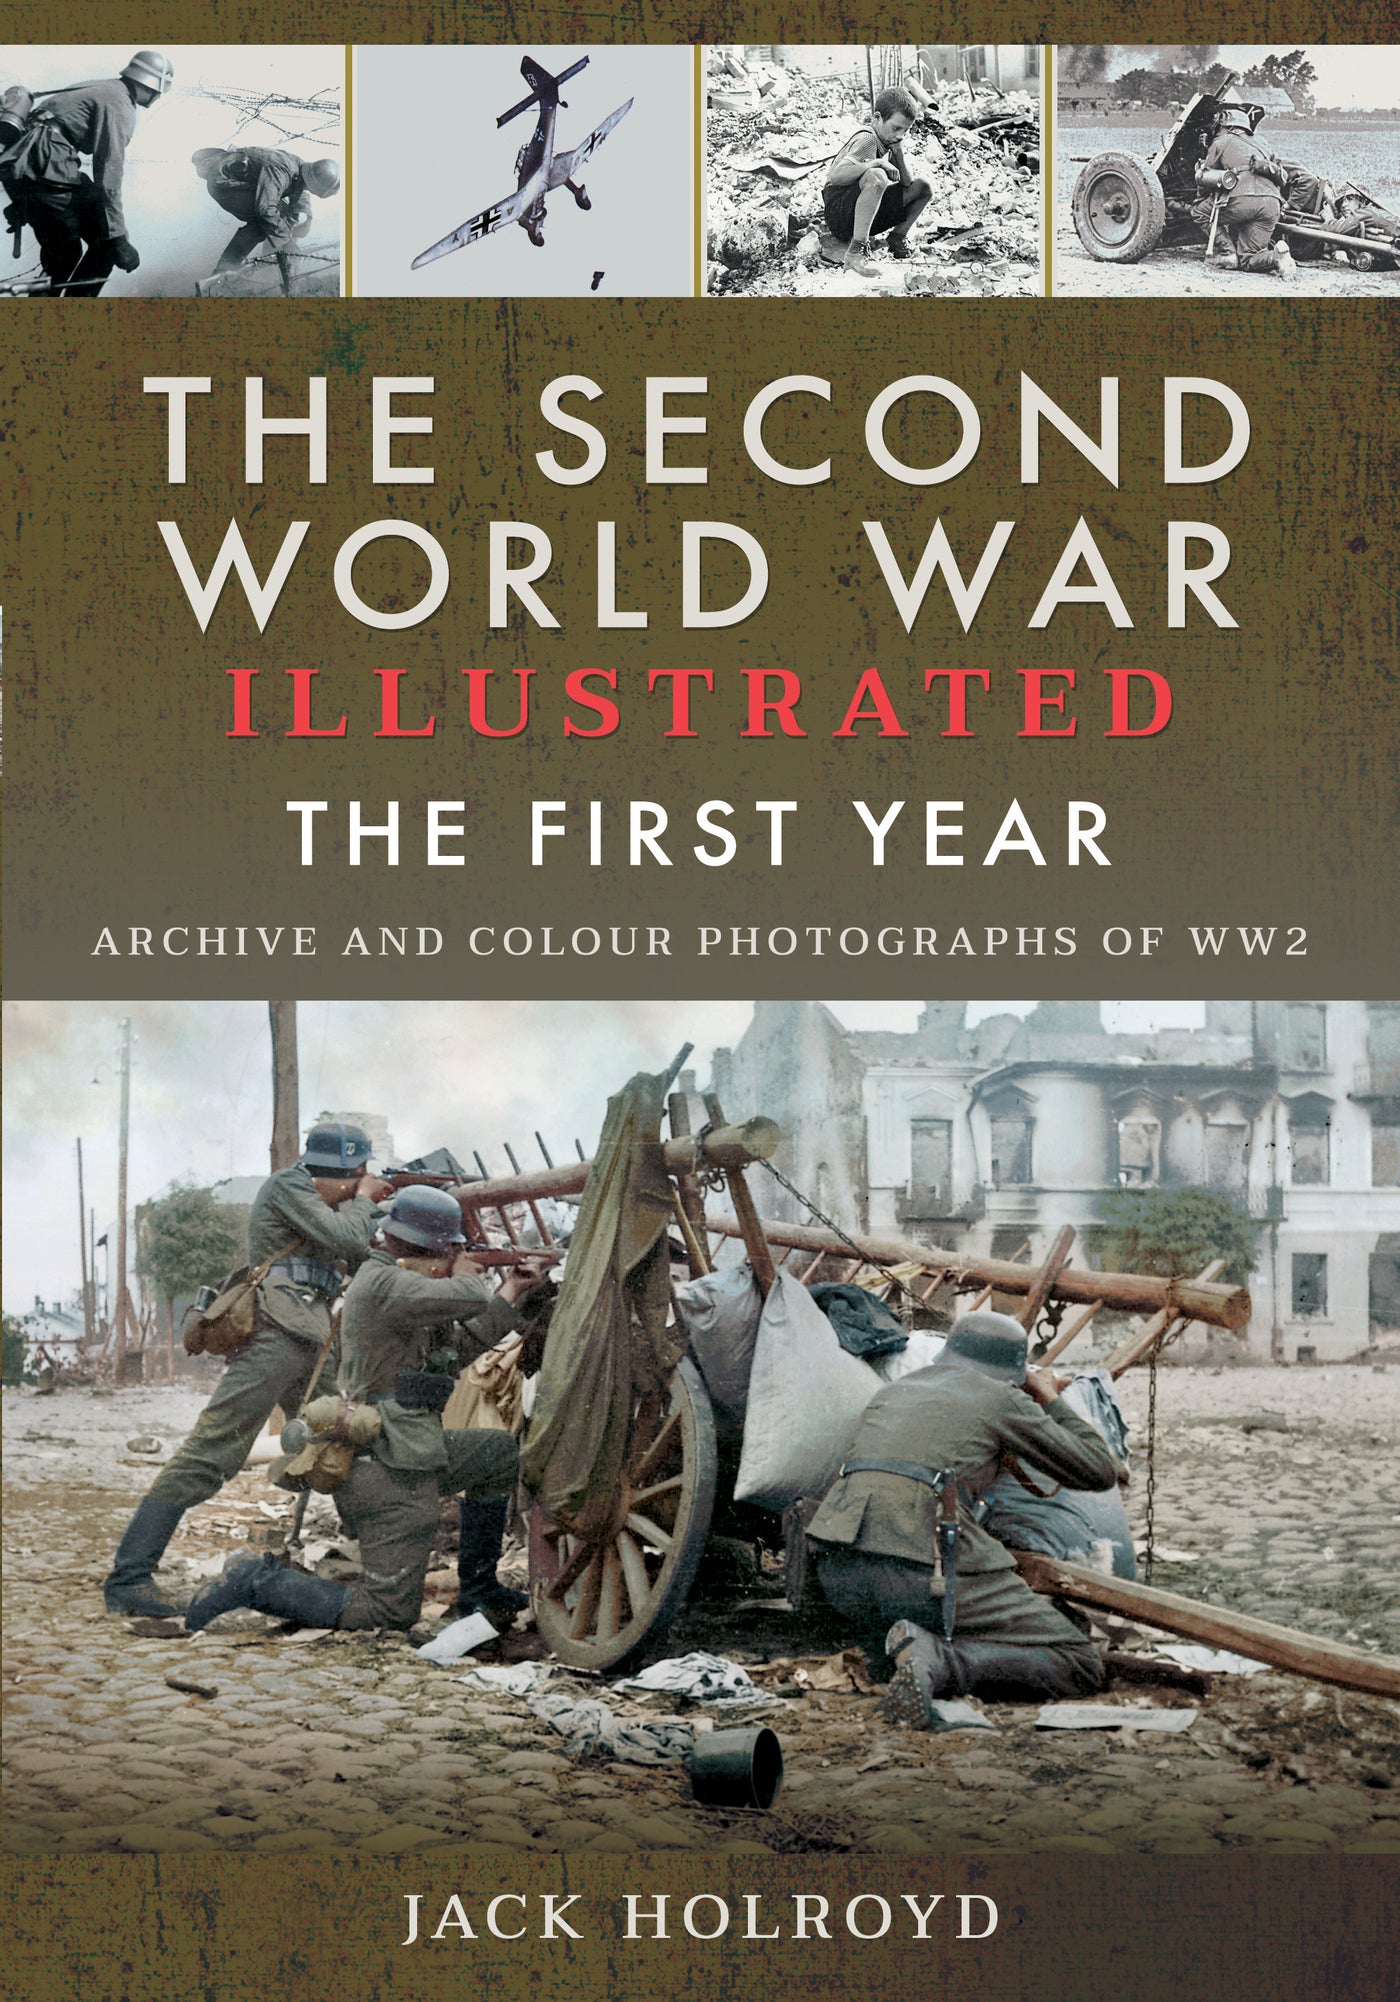 The Second World War Illustrated - The First Year